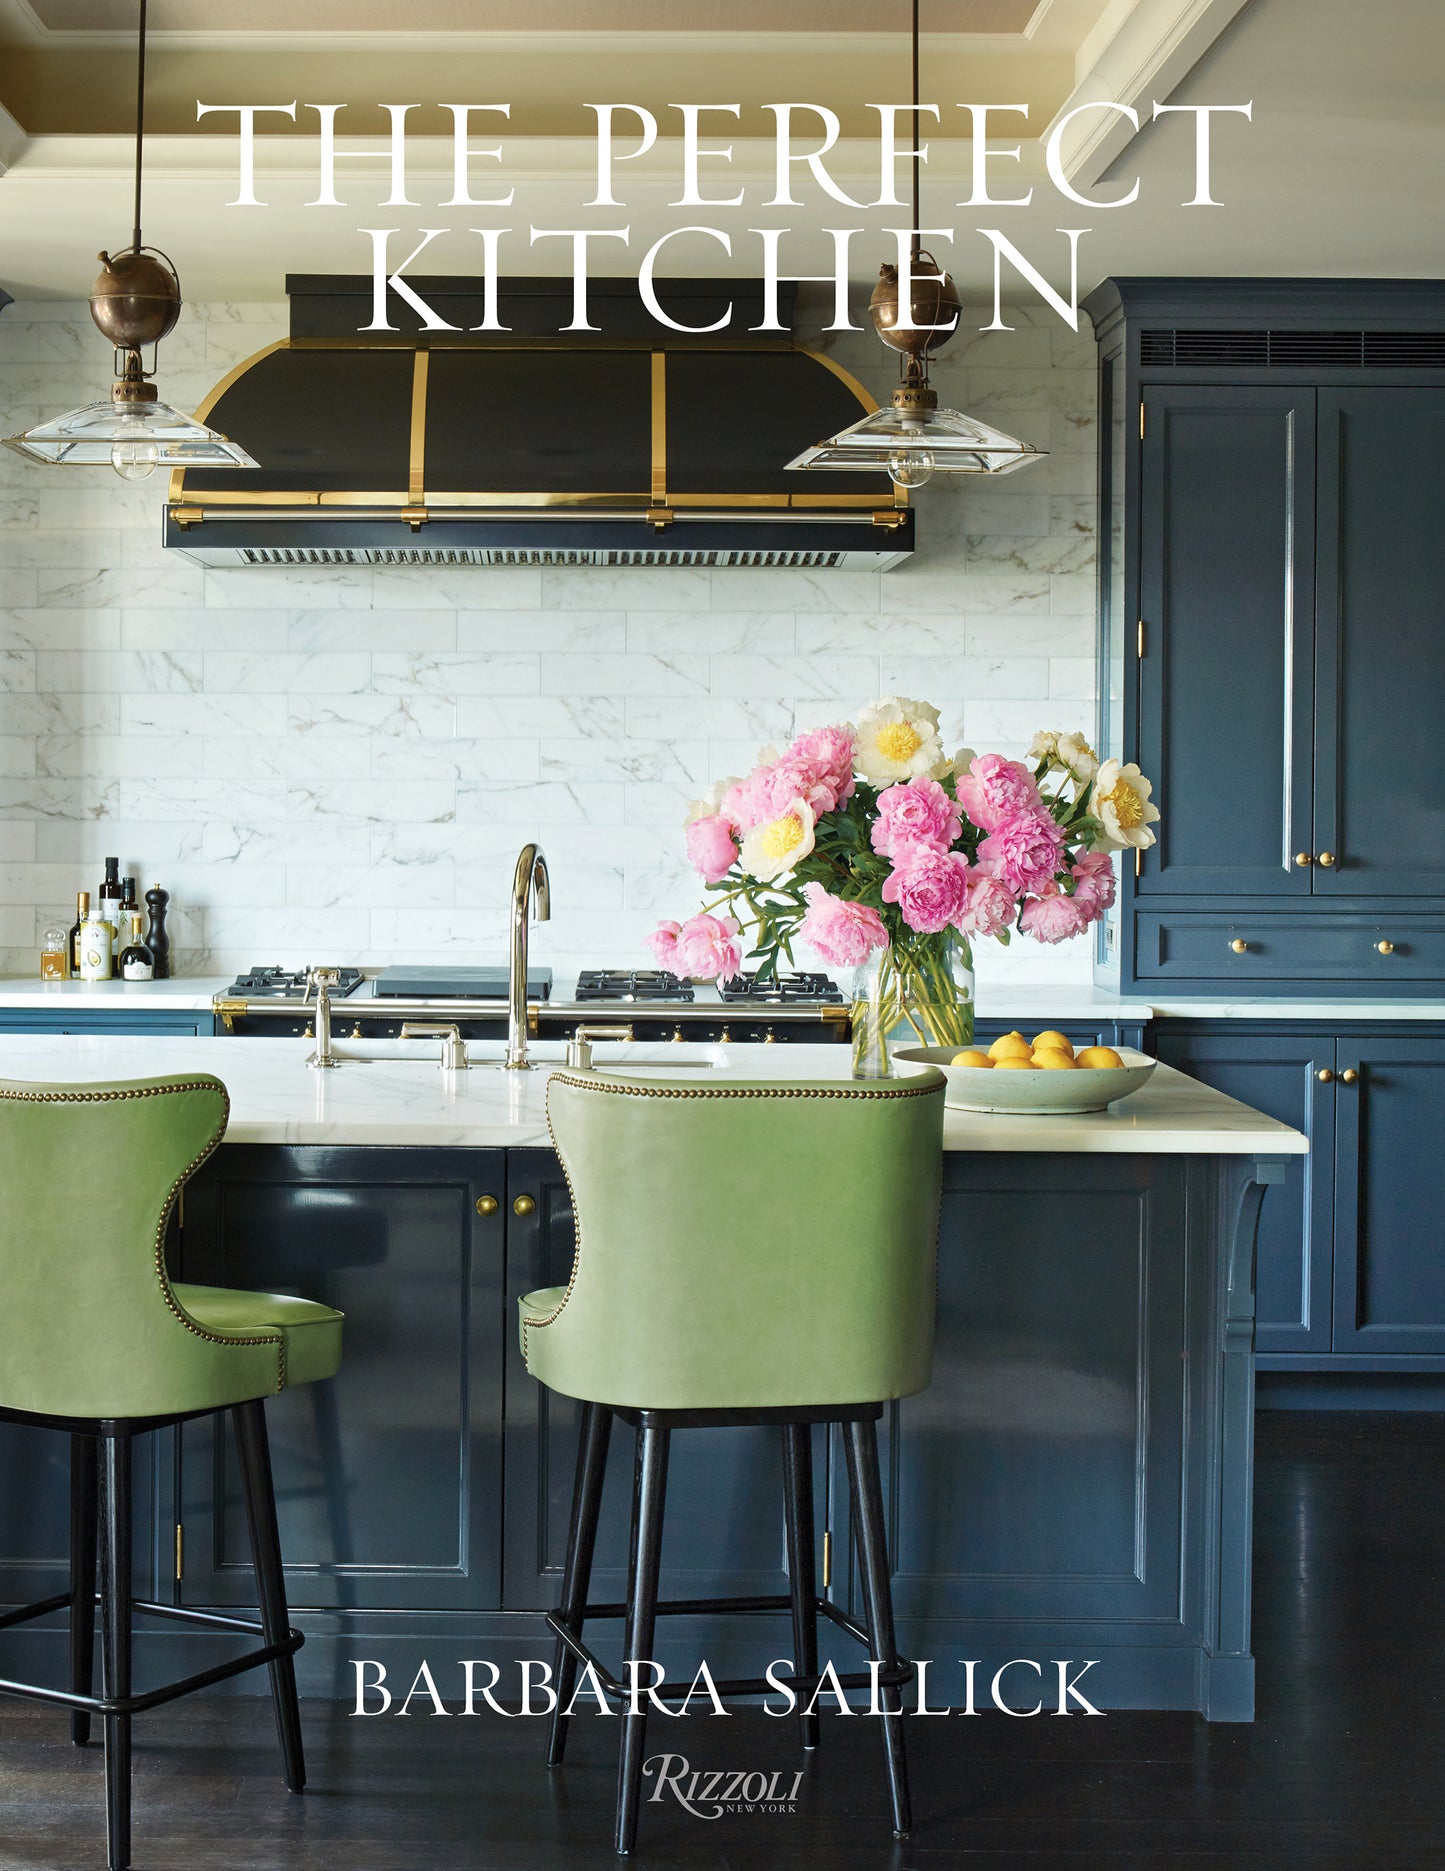 The Perfect Kitchen by Barbara Sallick